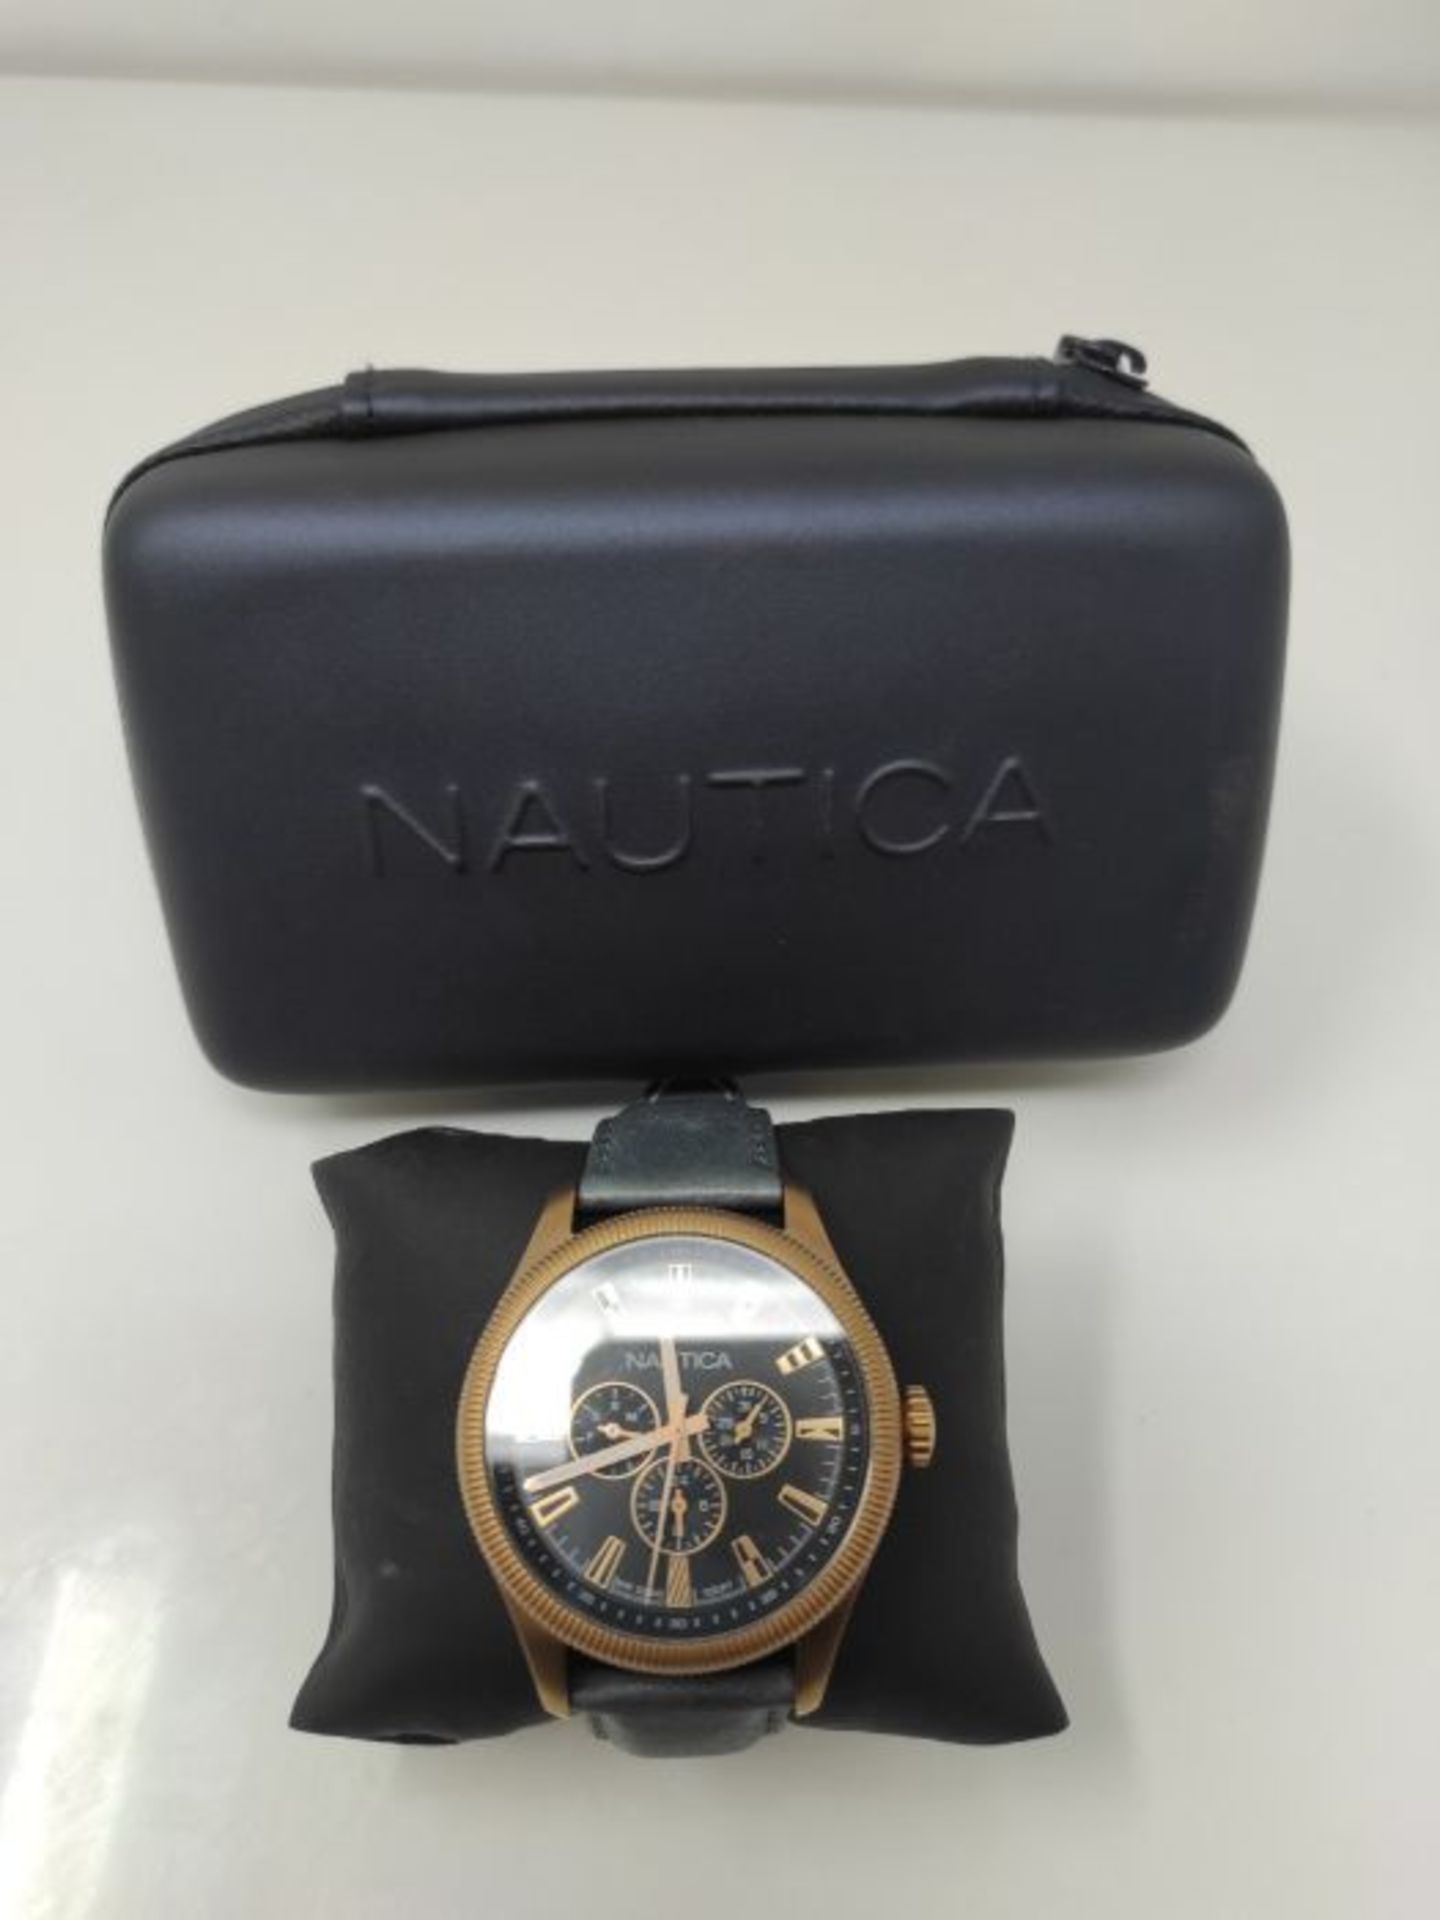 RRP £180.00 Nautica Men's Analogue Quartz Watch with Leather Strap NAPSTB003 - Image 2 of 3